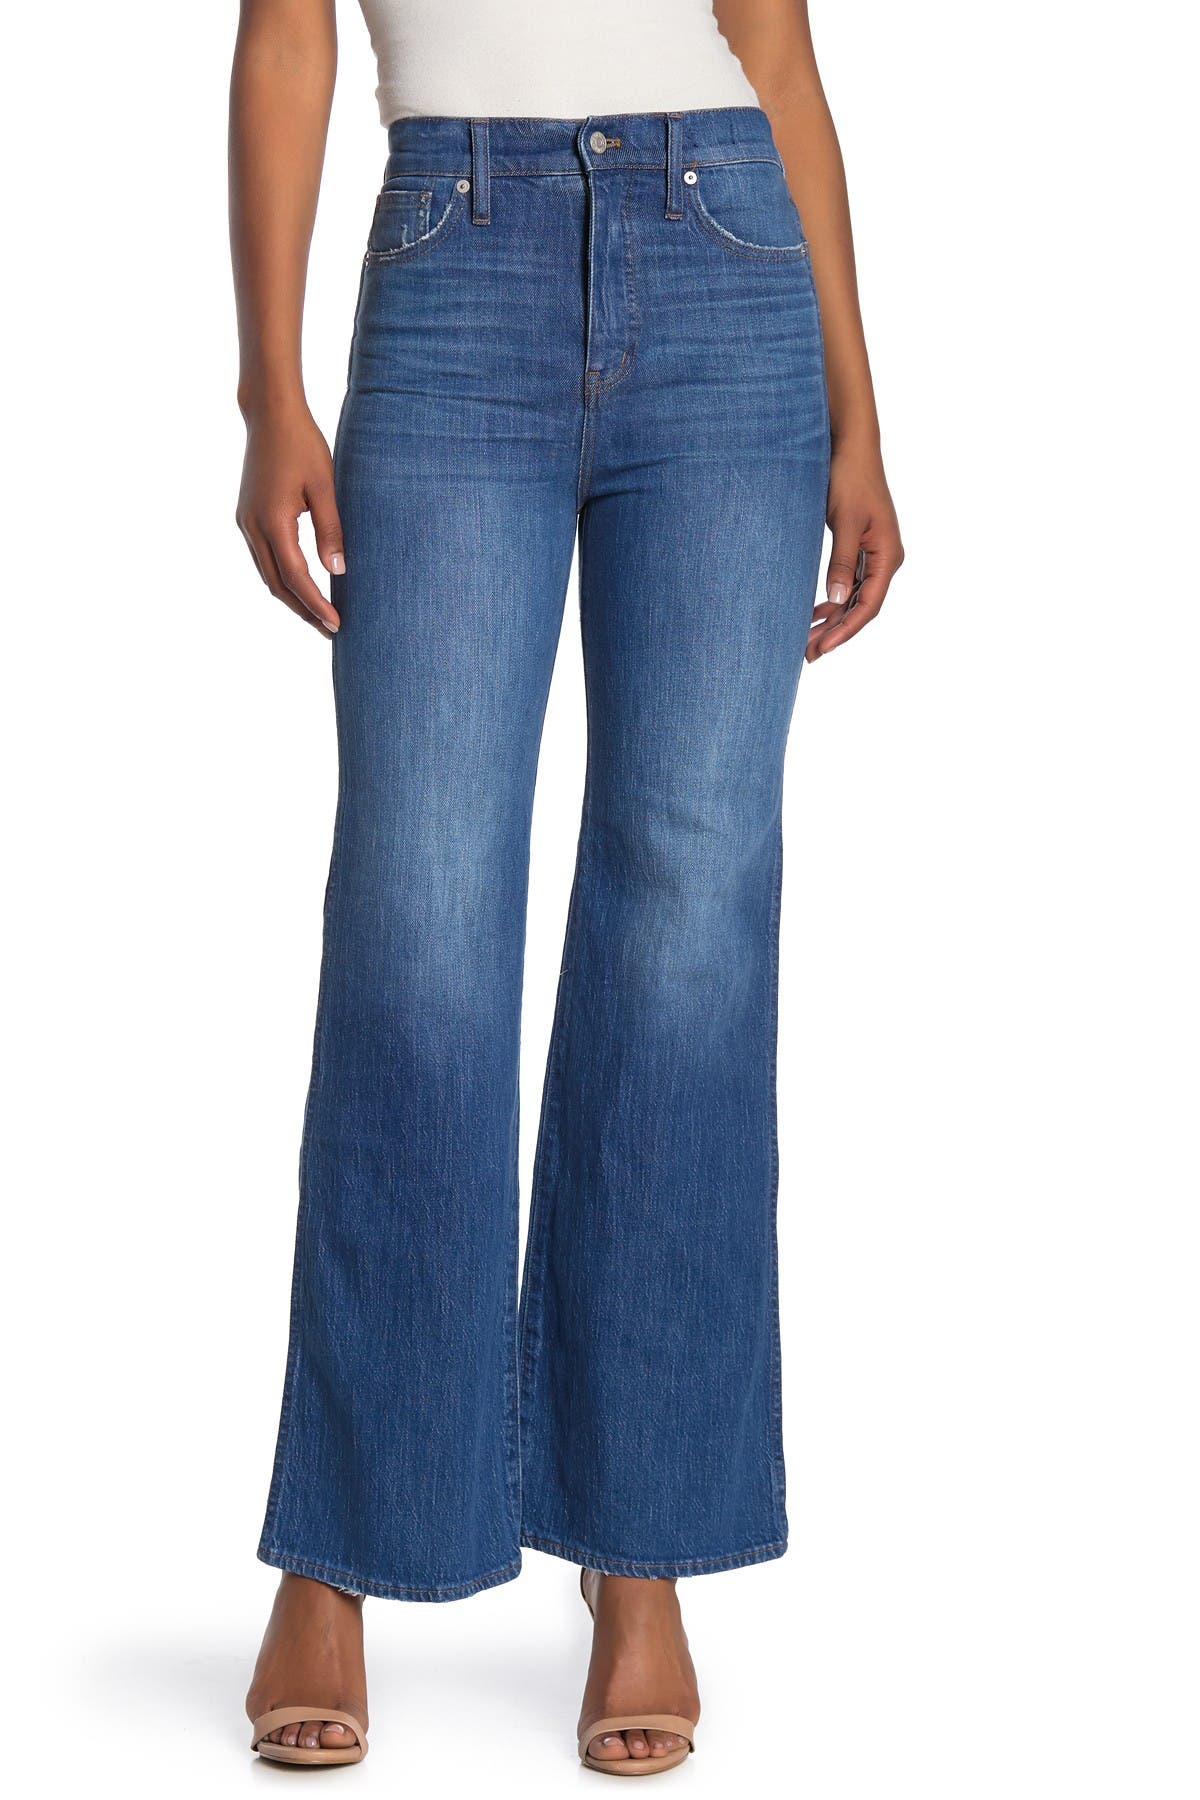 Madewell | High Rise Flare Jeans 